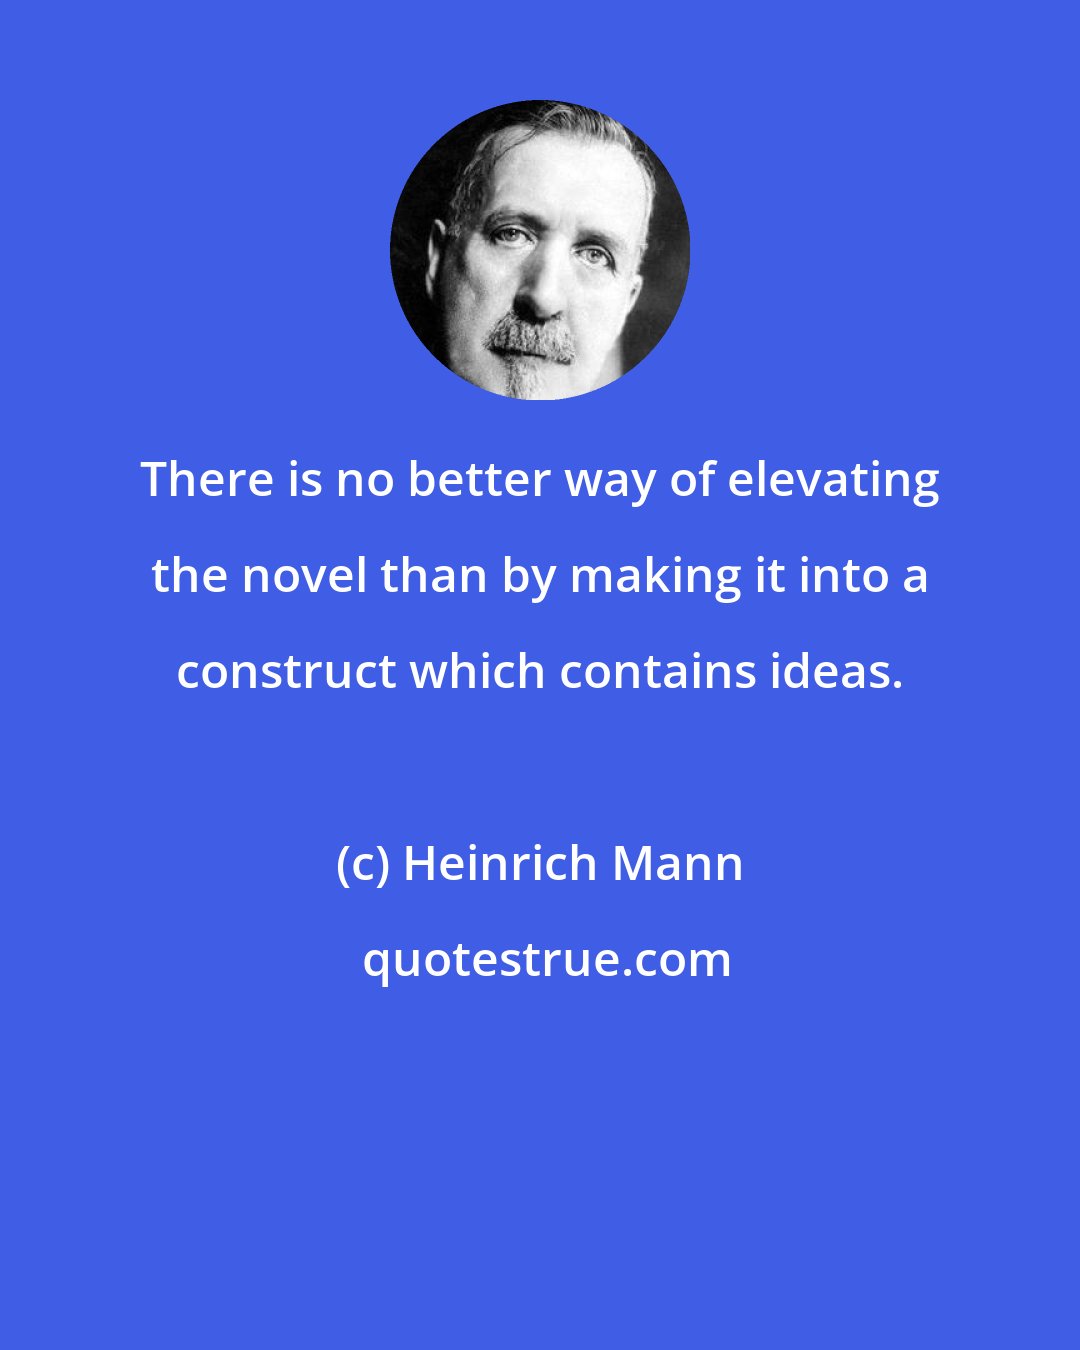 Heinrich Mann: There is no better way of elevating the novel than by making it into a construct which contains ideas.